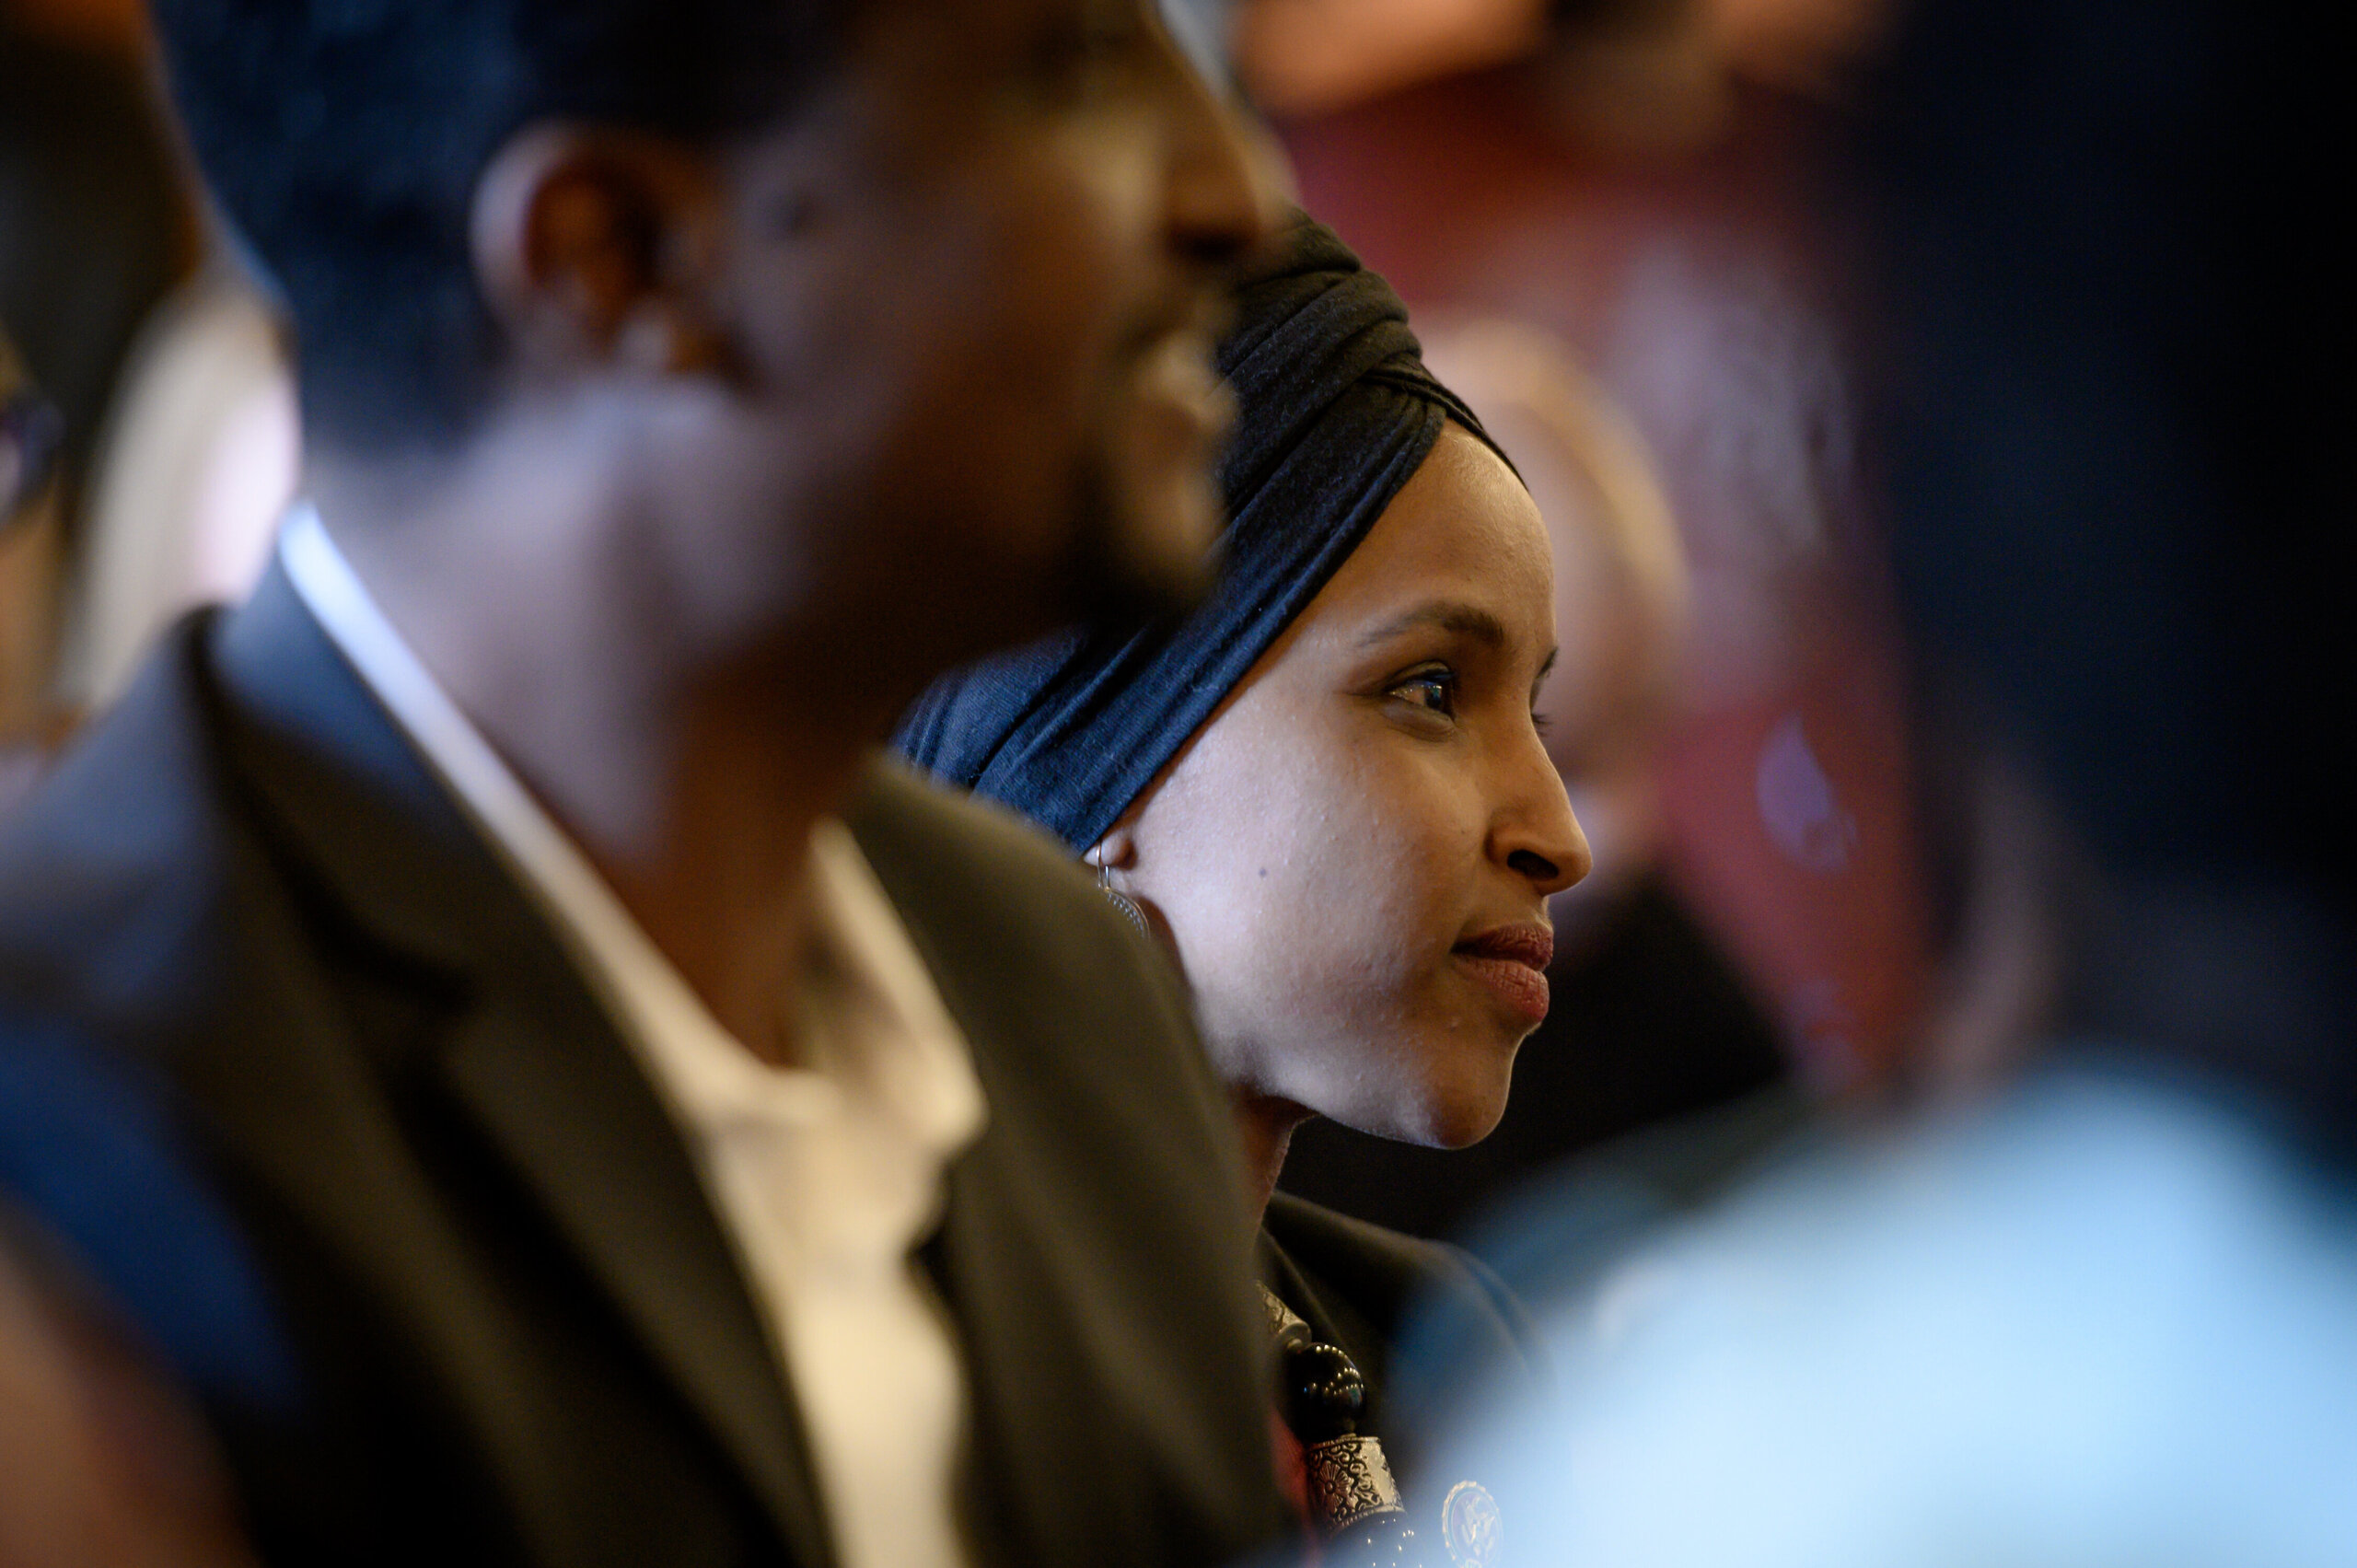 Omar listens to a speaker during the Paycheck Fairness and Women's Workforce Development Town Hall in Minneapolis.